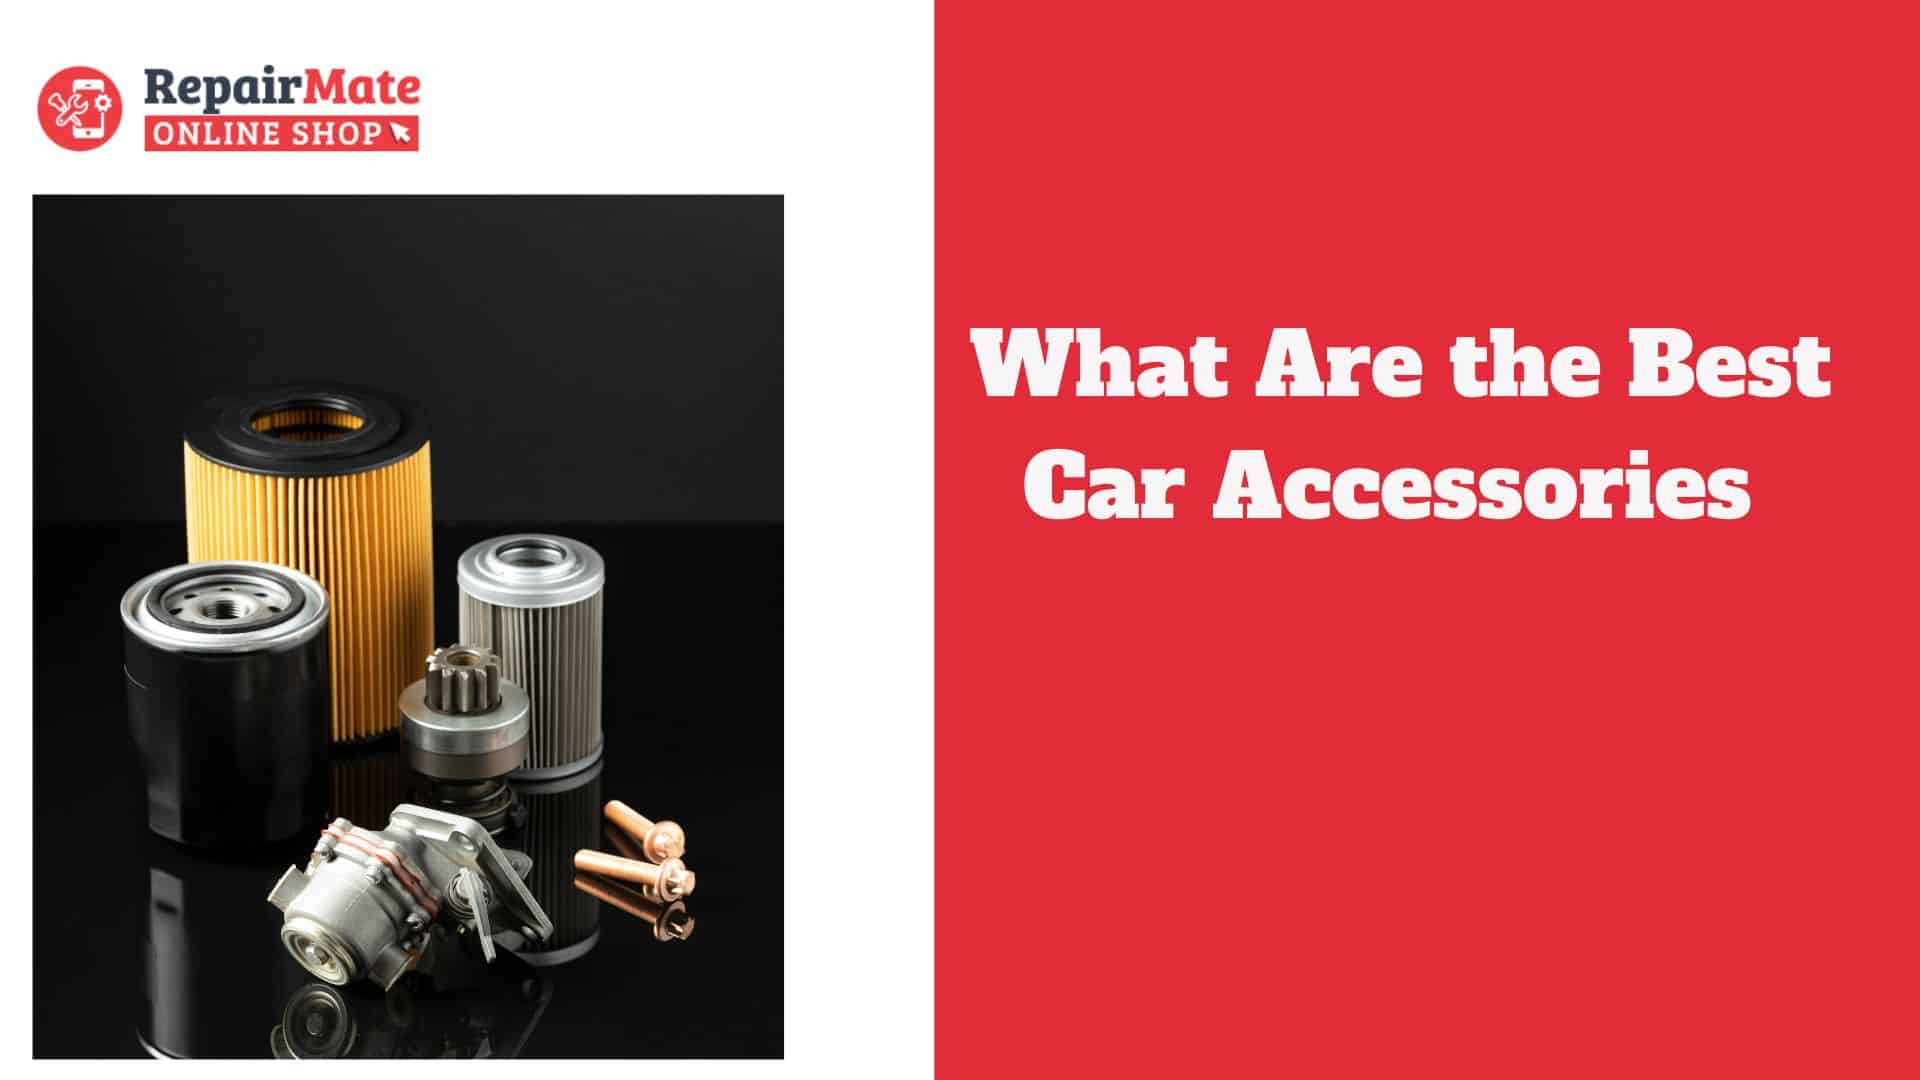 What Are the Best Car Accessories?